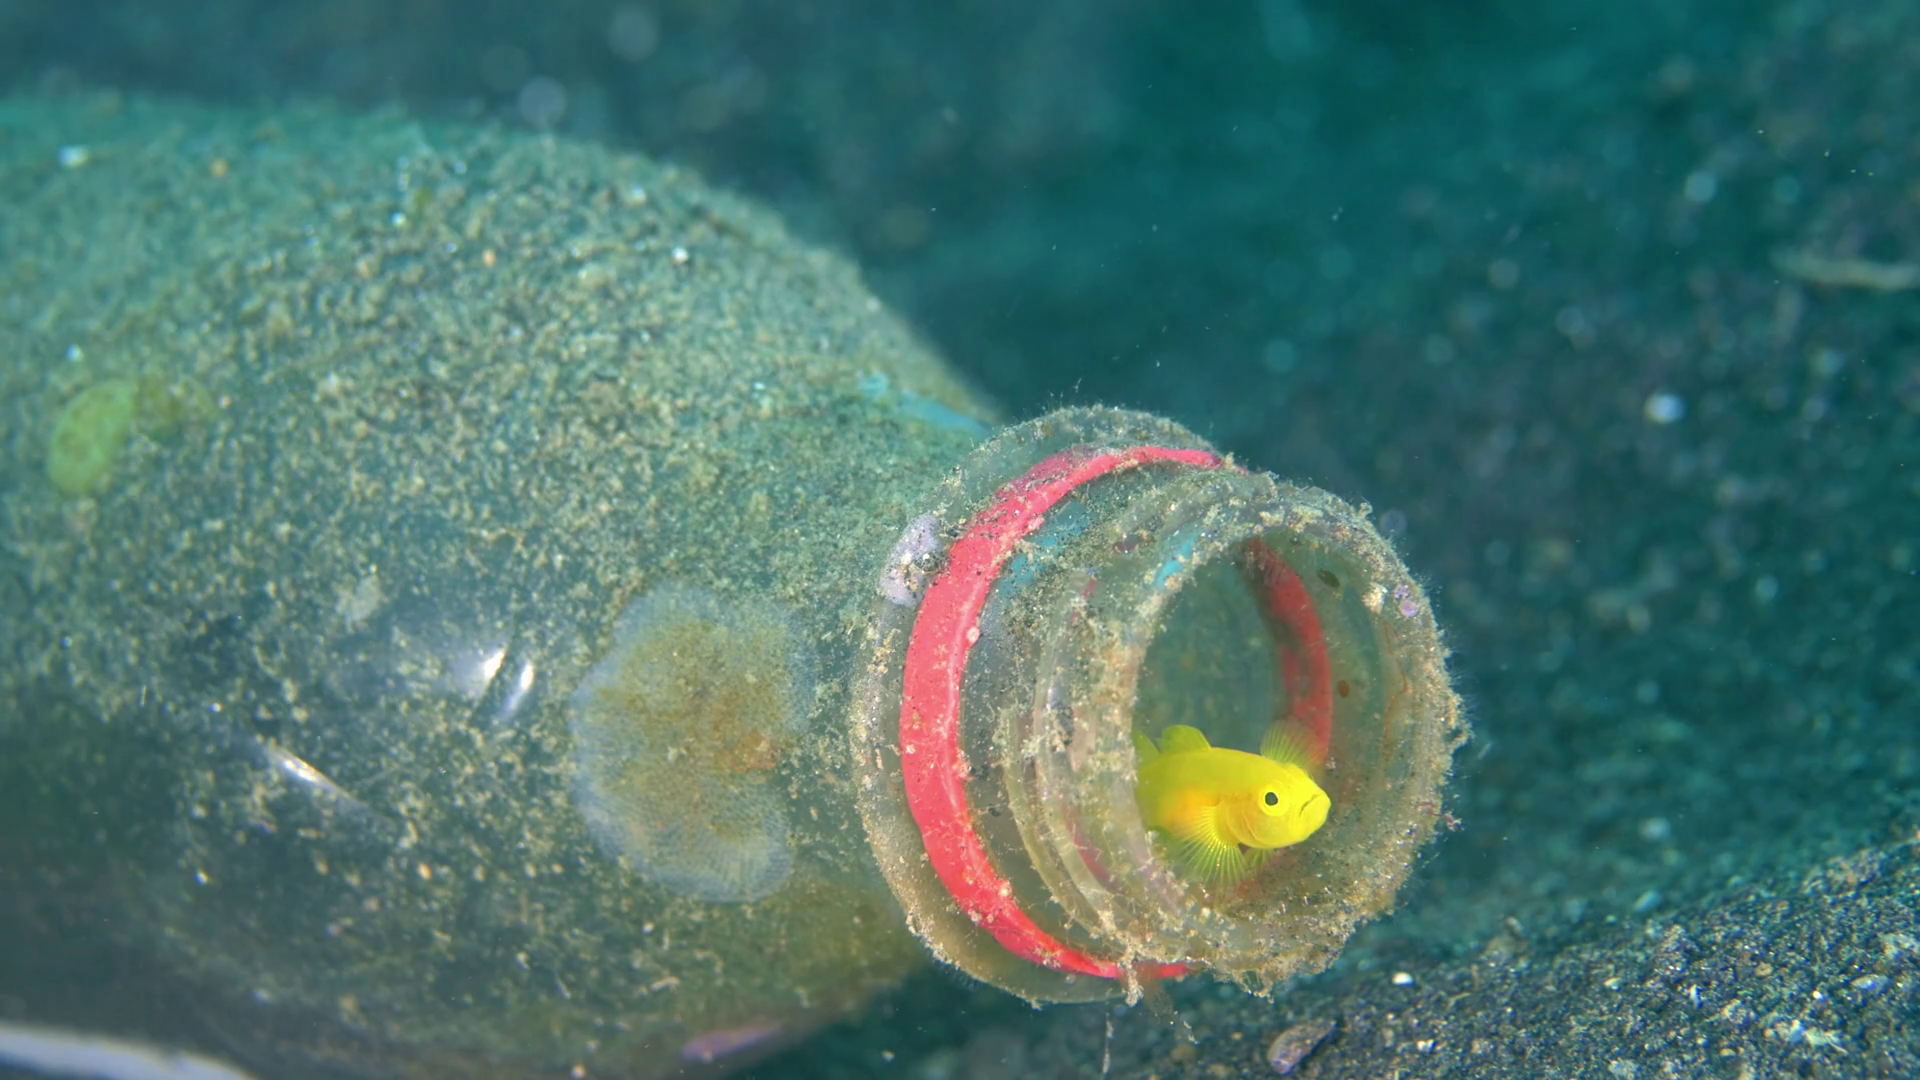 Small Yellow Goby Peeks From The Neck Of A Discarded Bottle Then